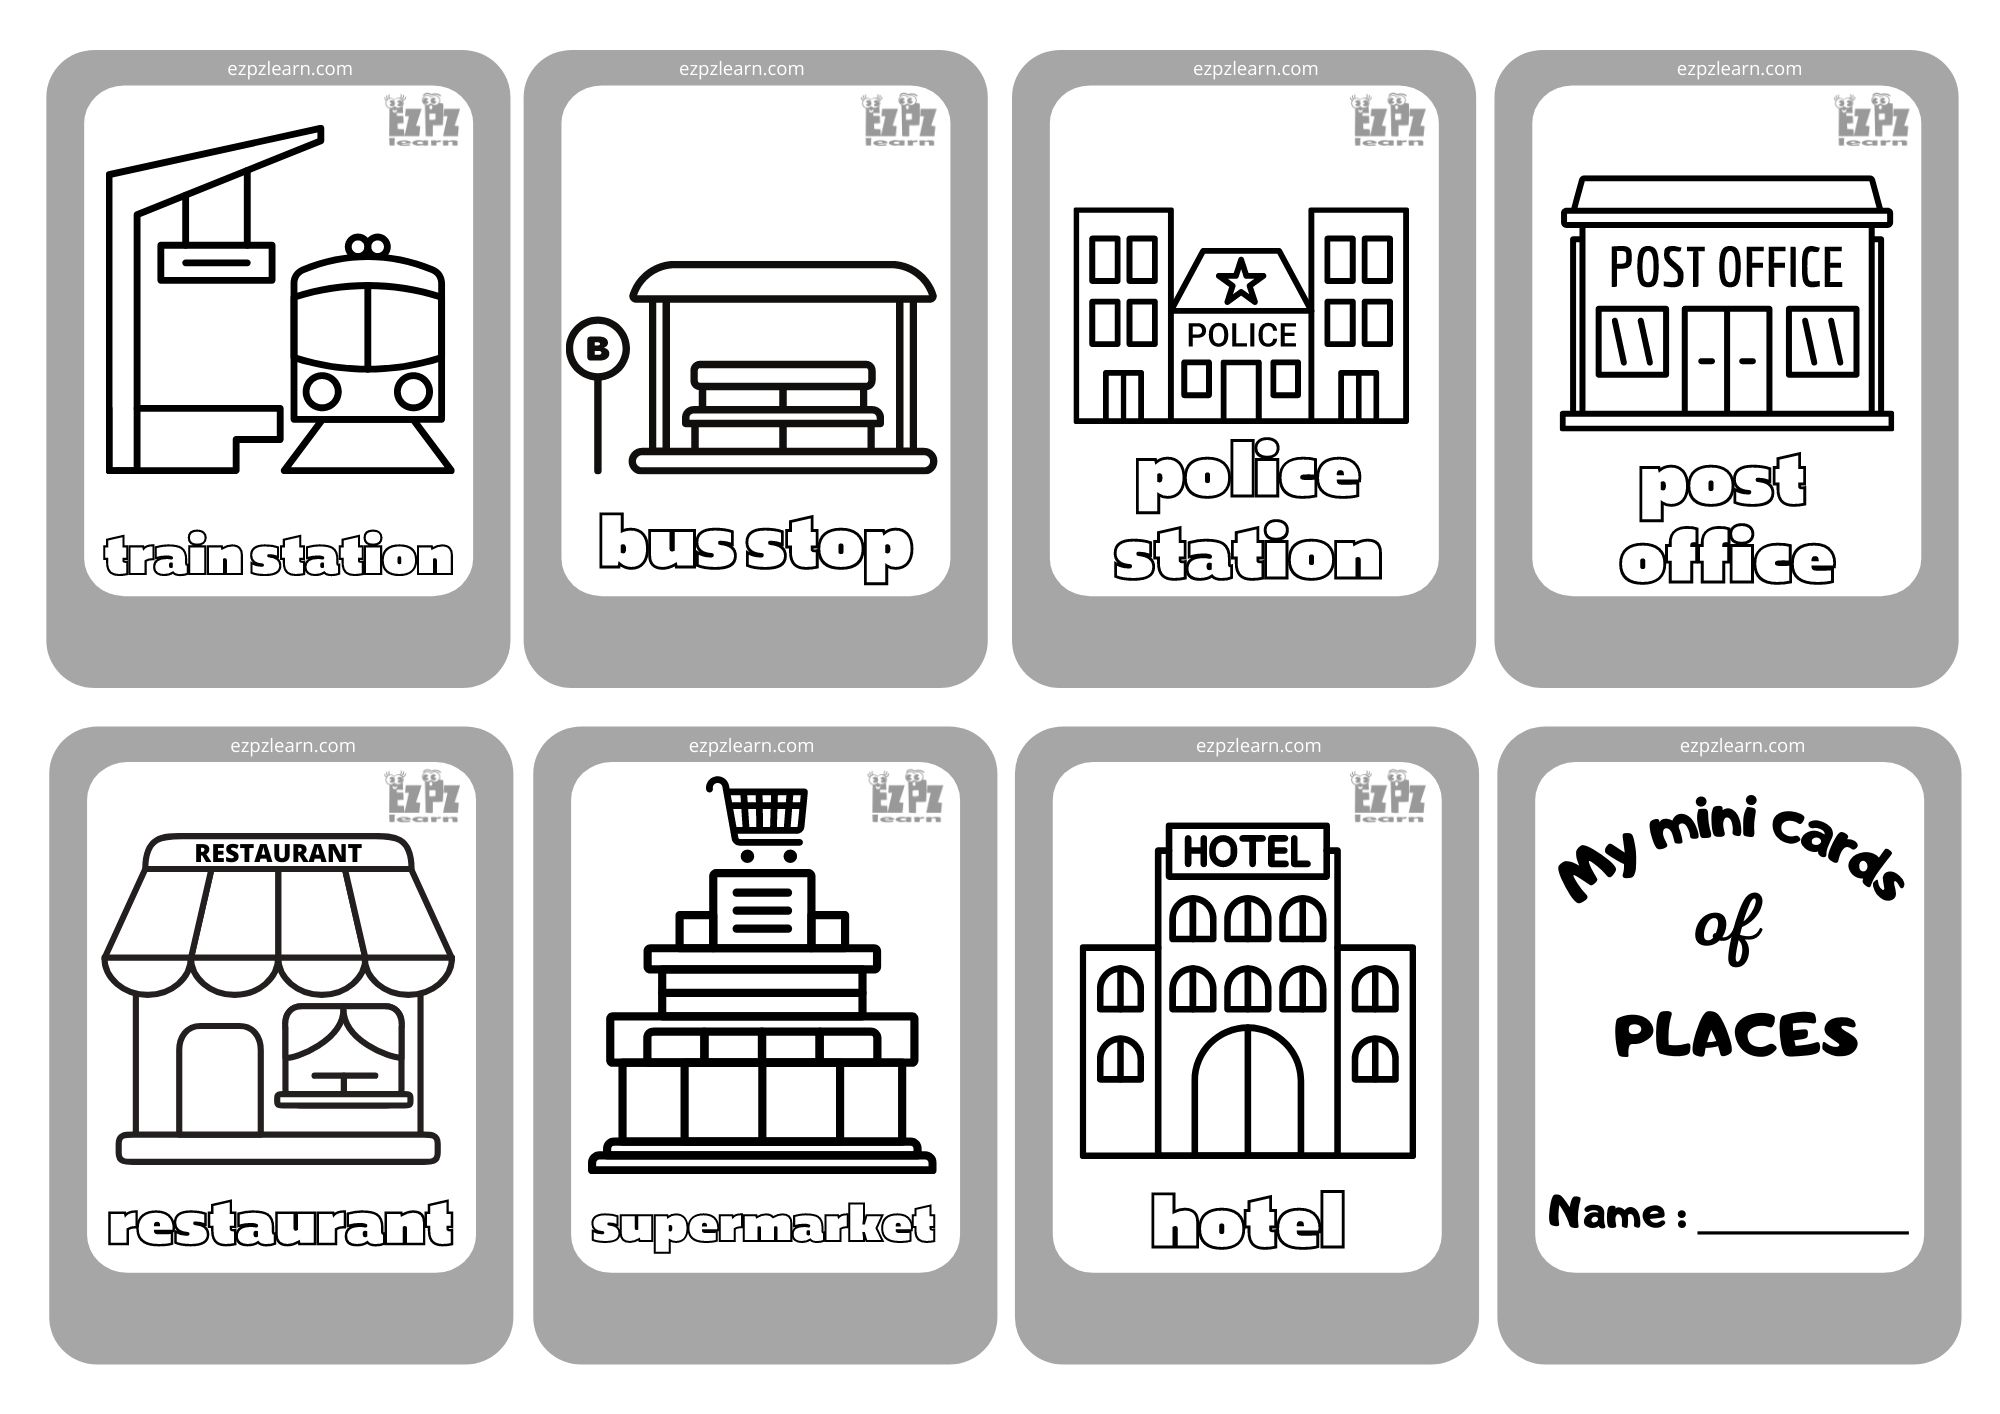 Places in the City 20 Mini Cards Coloring   Ezpzlearn.com